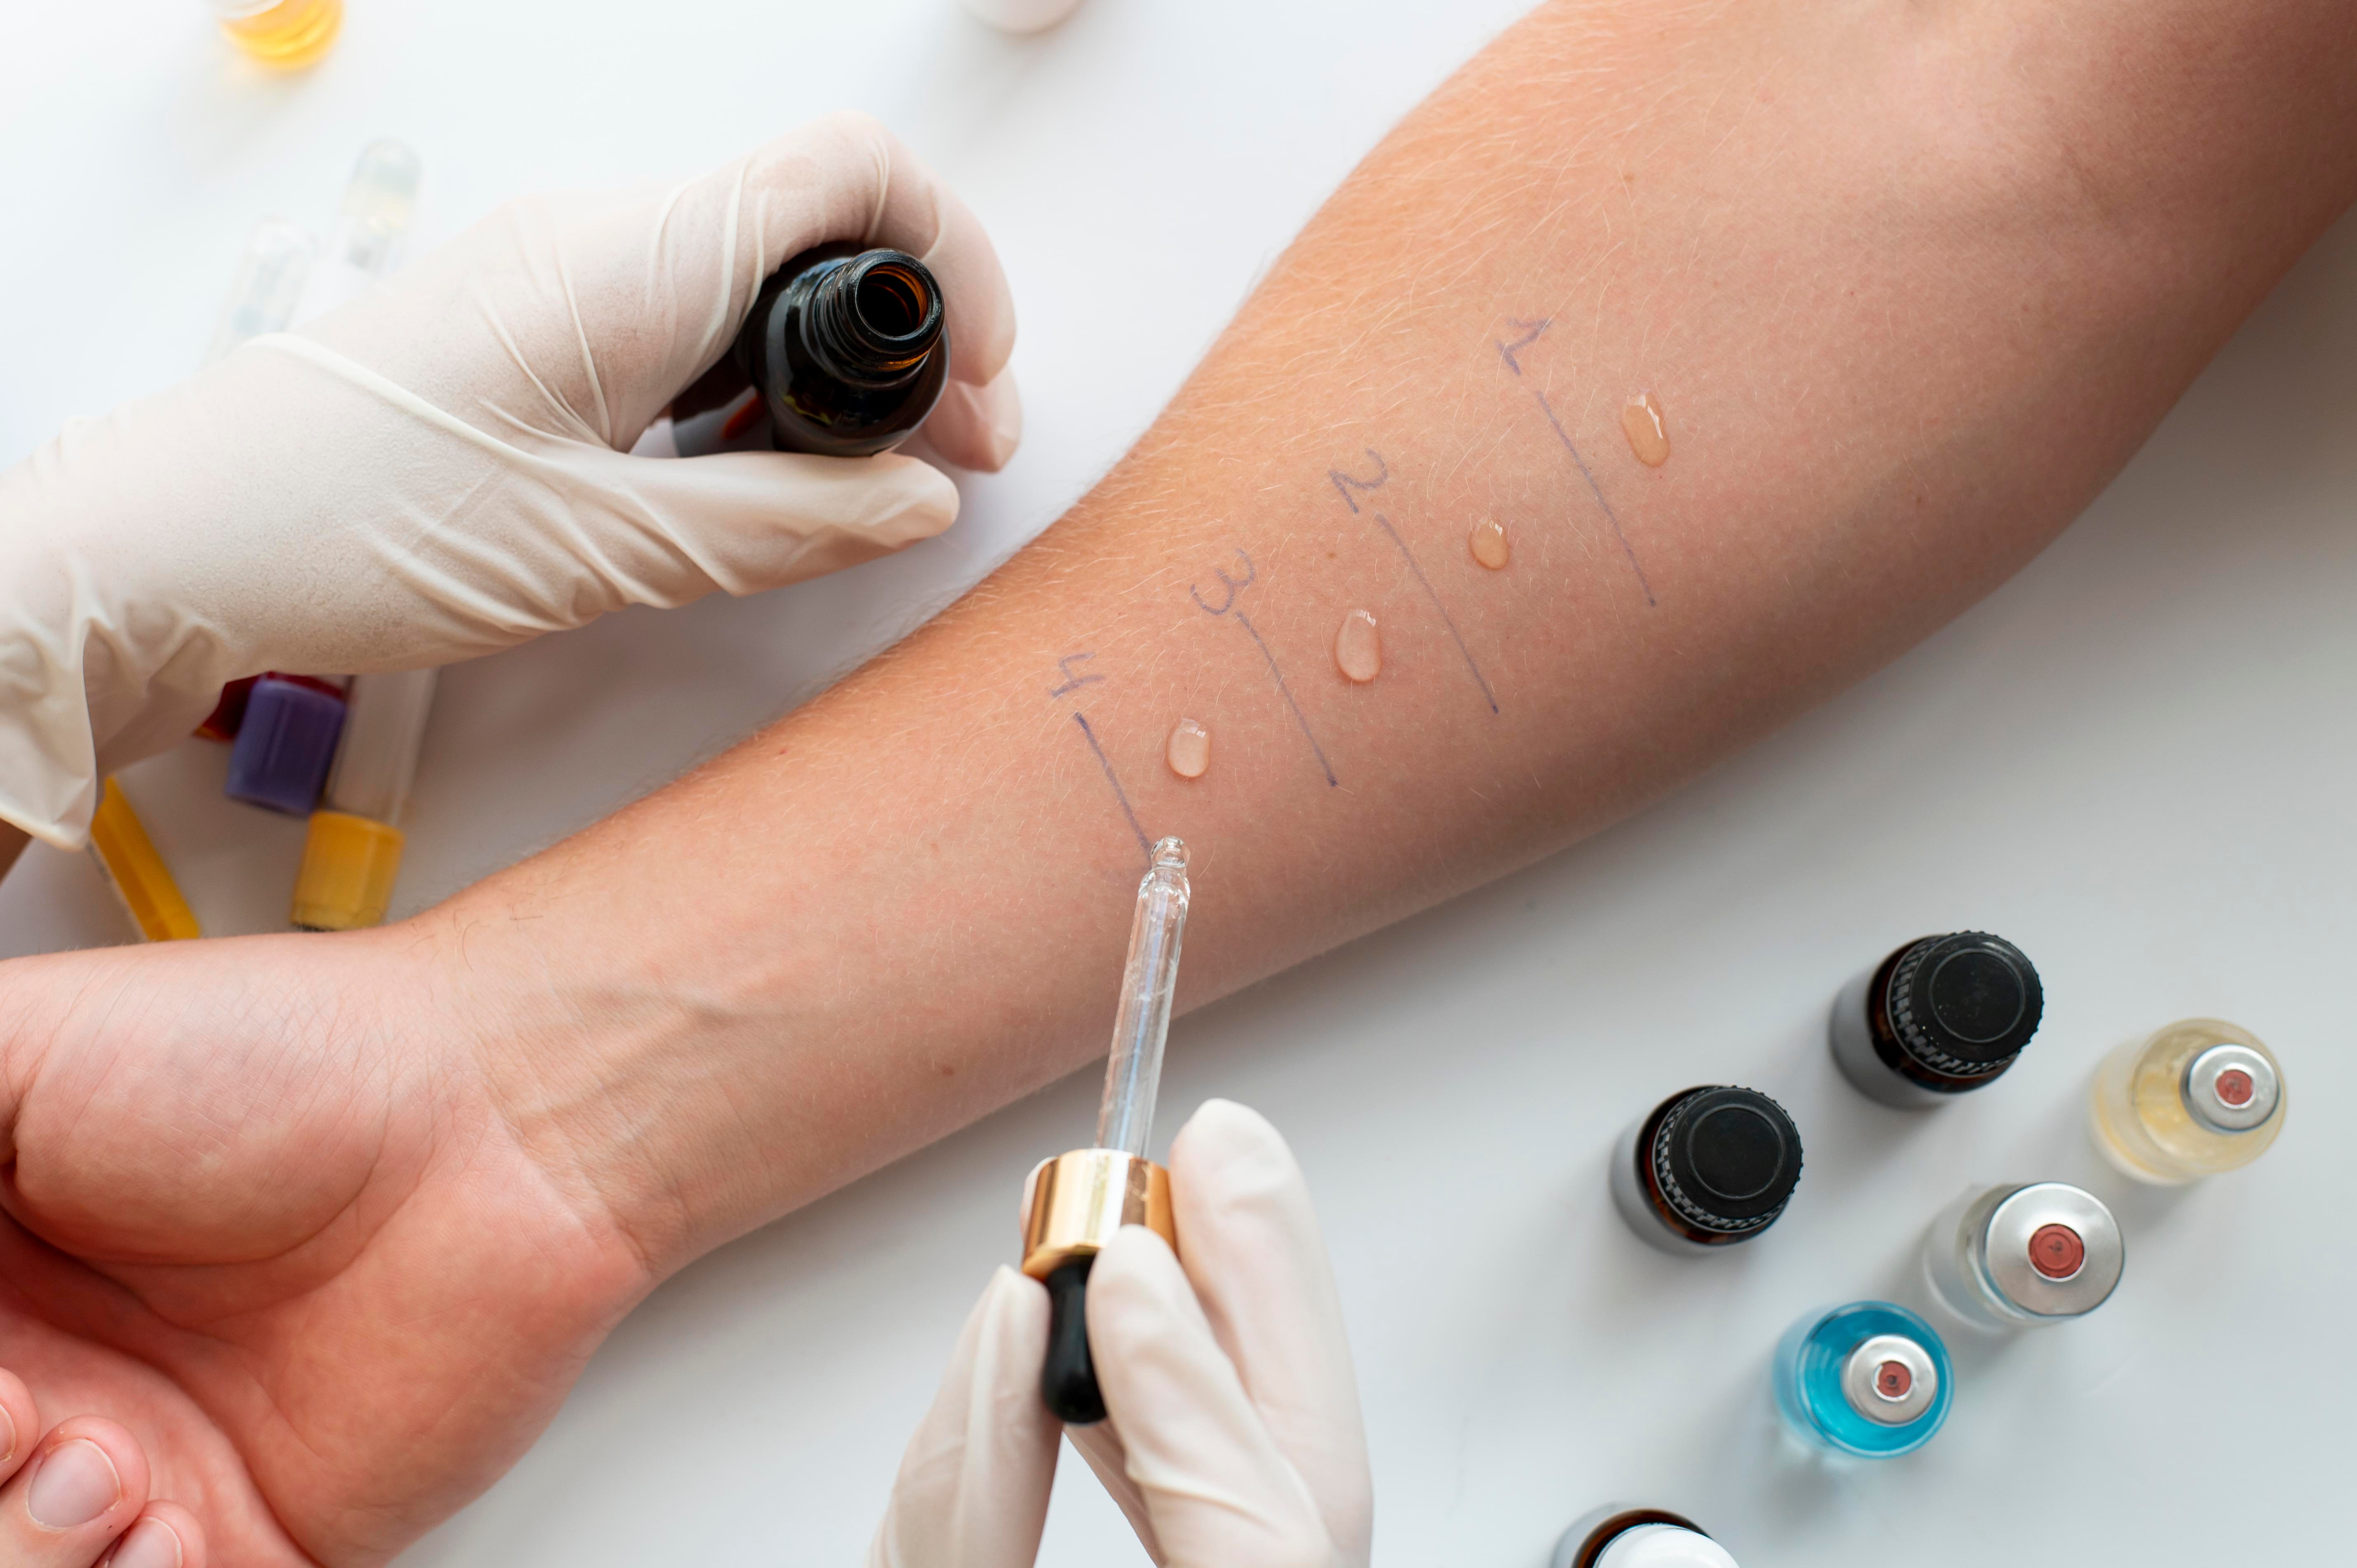 Allergy testing on a patient's arm